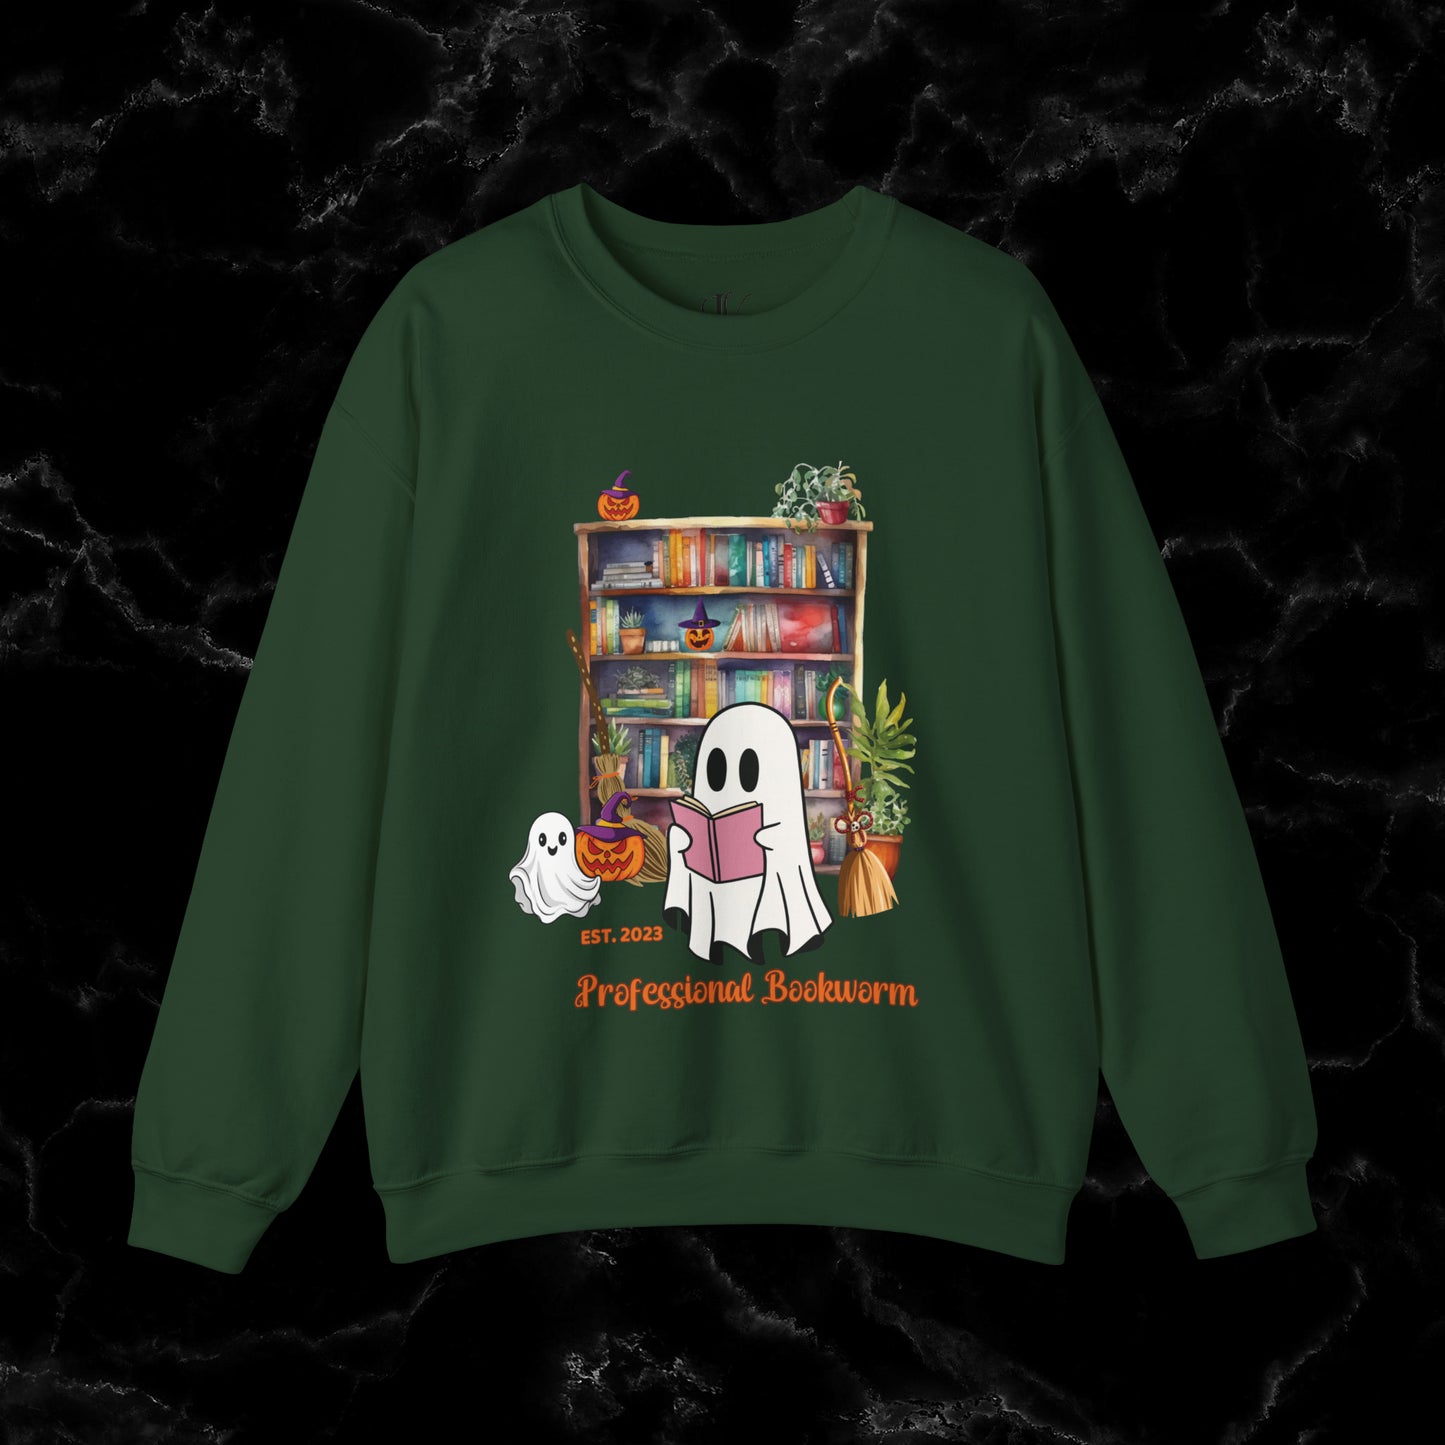 Witchy Gifts for Book Lover Cottagecore Pumpkin Witch Sweatshirt - Bookworm Back To School Reading Fall Sweater, Perfect Present for Bookworm Aunt's Birthday Sweatshirt S Forest Green 